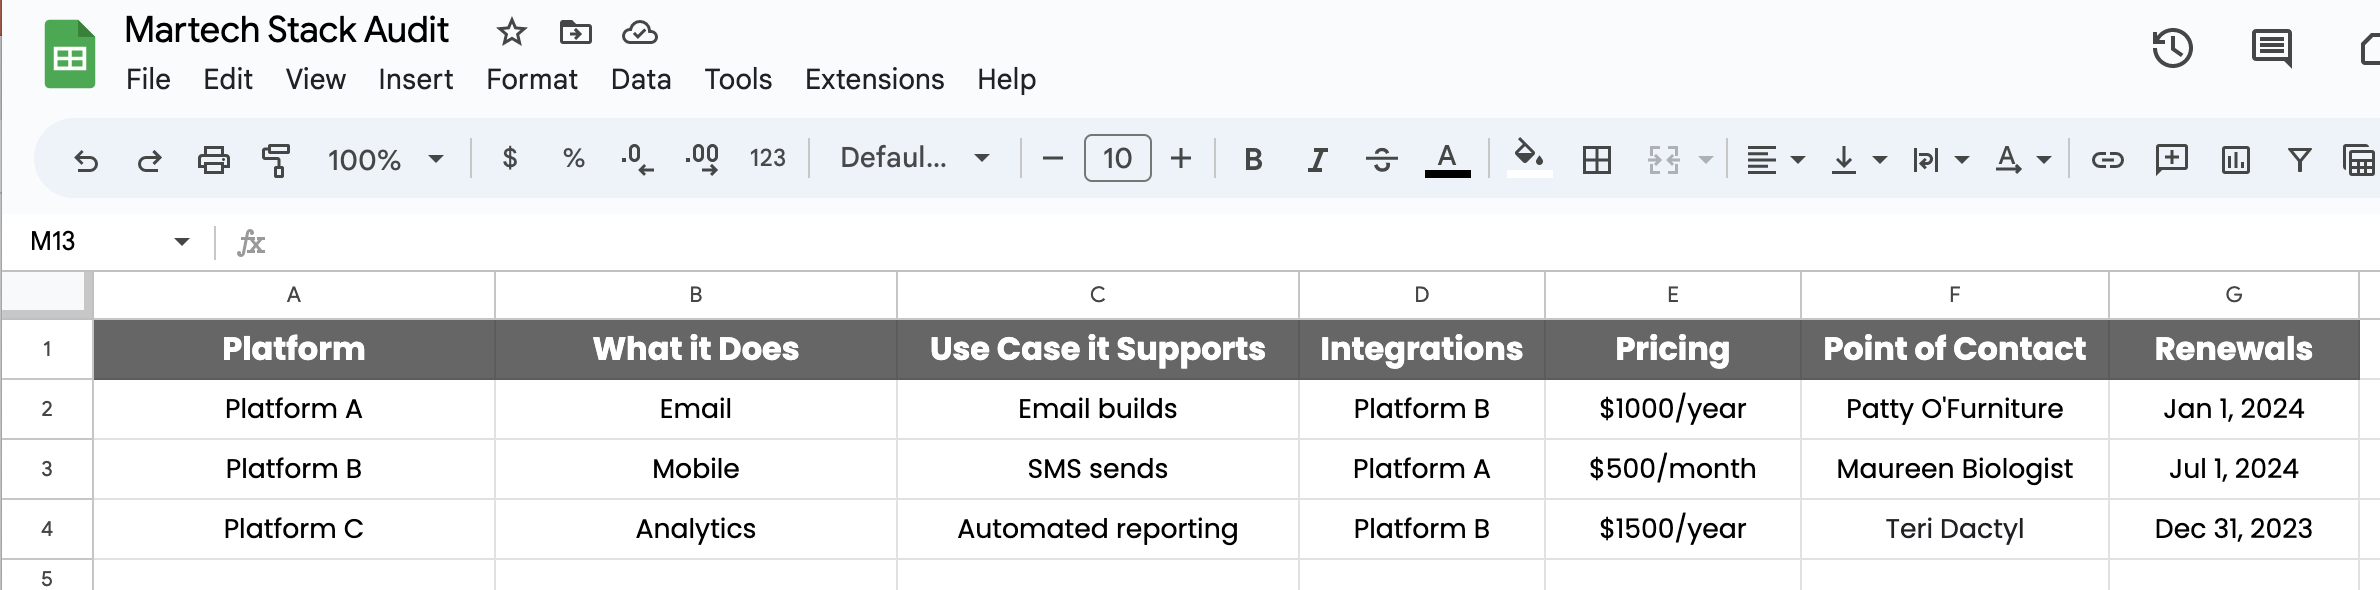 Screenshot of Google sheets showing a sample martech stack audit spreadsheet. Columns align with what's in the text example.